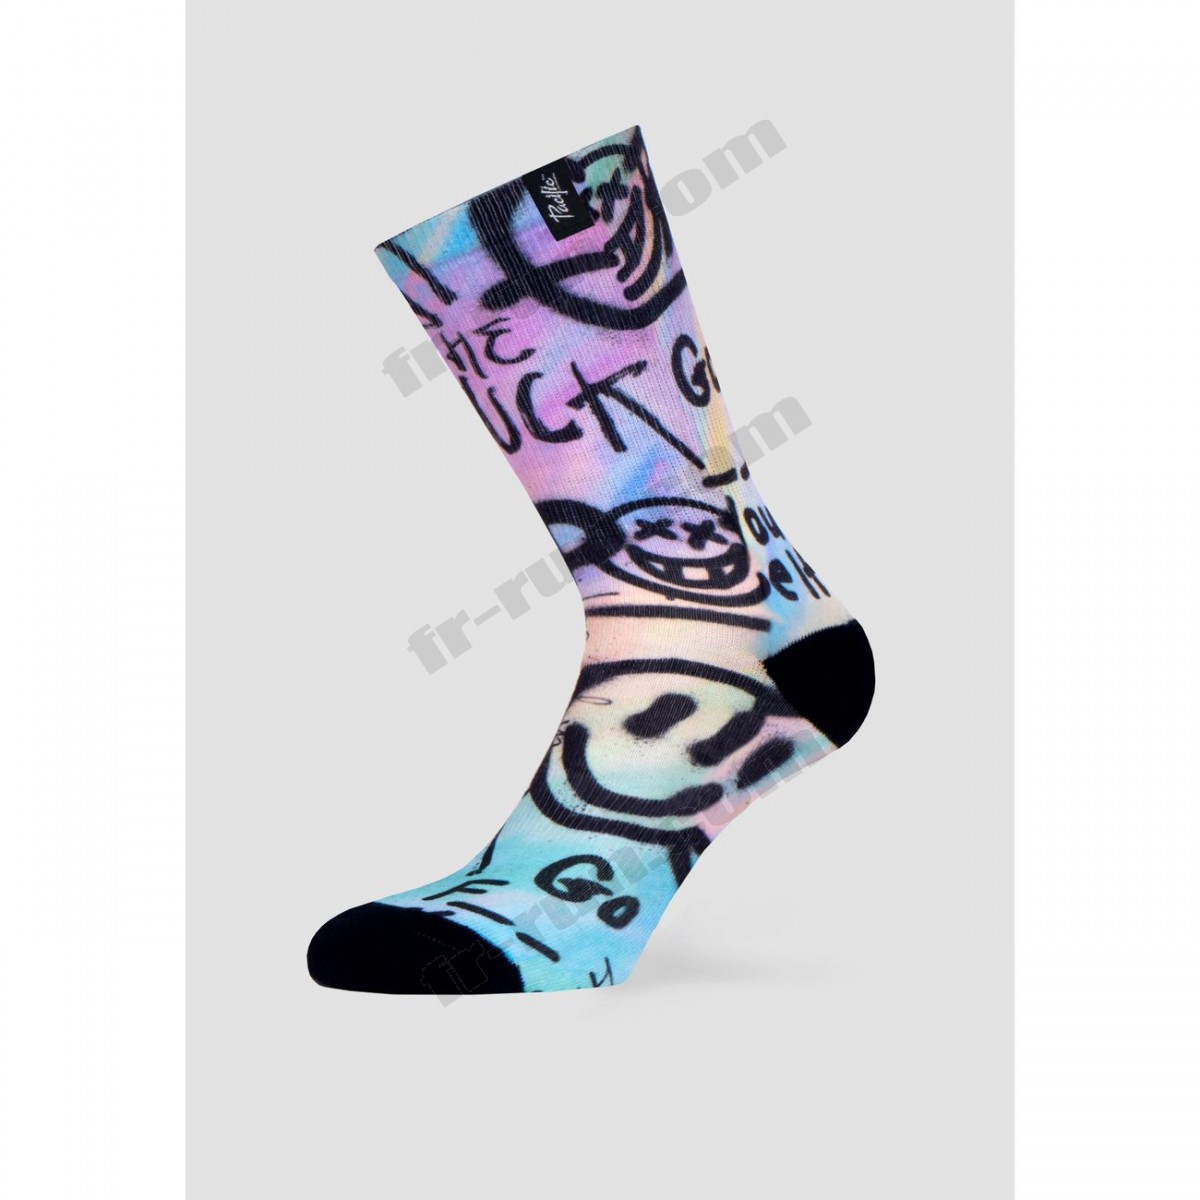 Pacific And Co/running adulte PACIFIC and CO ACID COLOR Unisex Casual Socks ◇◇◇ Pas Cher Du Tout - Pacific And Co/running adulte PACIFIC and CO ACID COLOR Unisex Casual Socks ◇◇◇ Pas Cher Du Tout